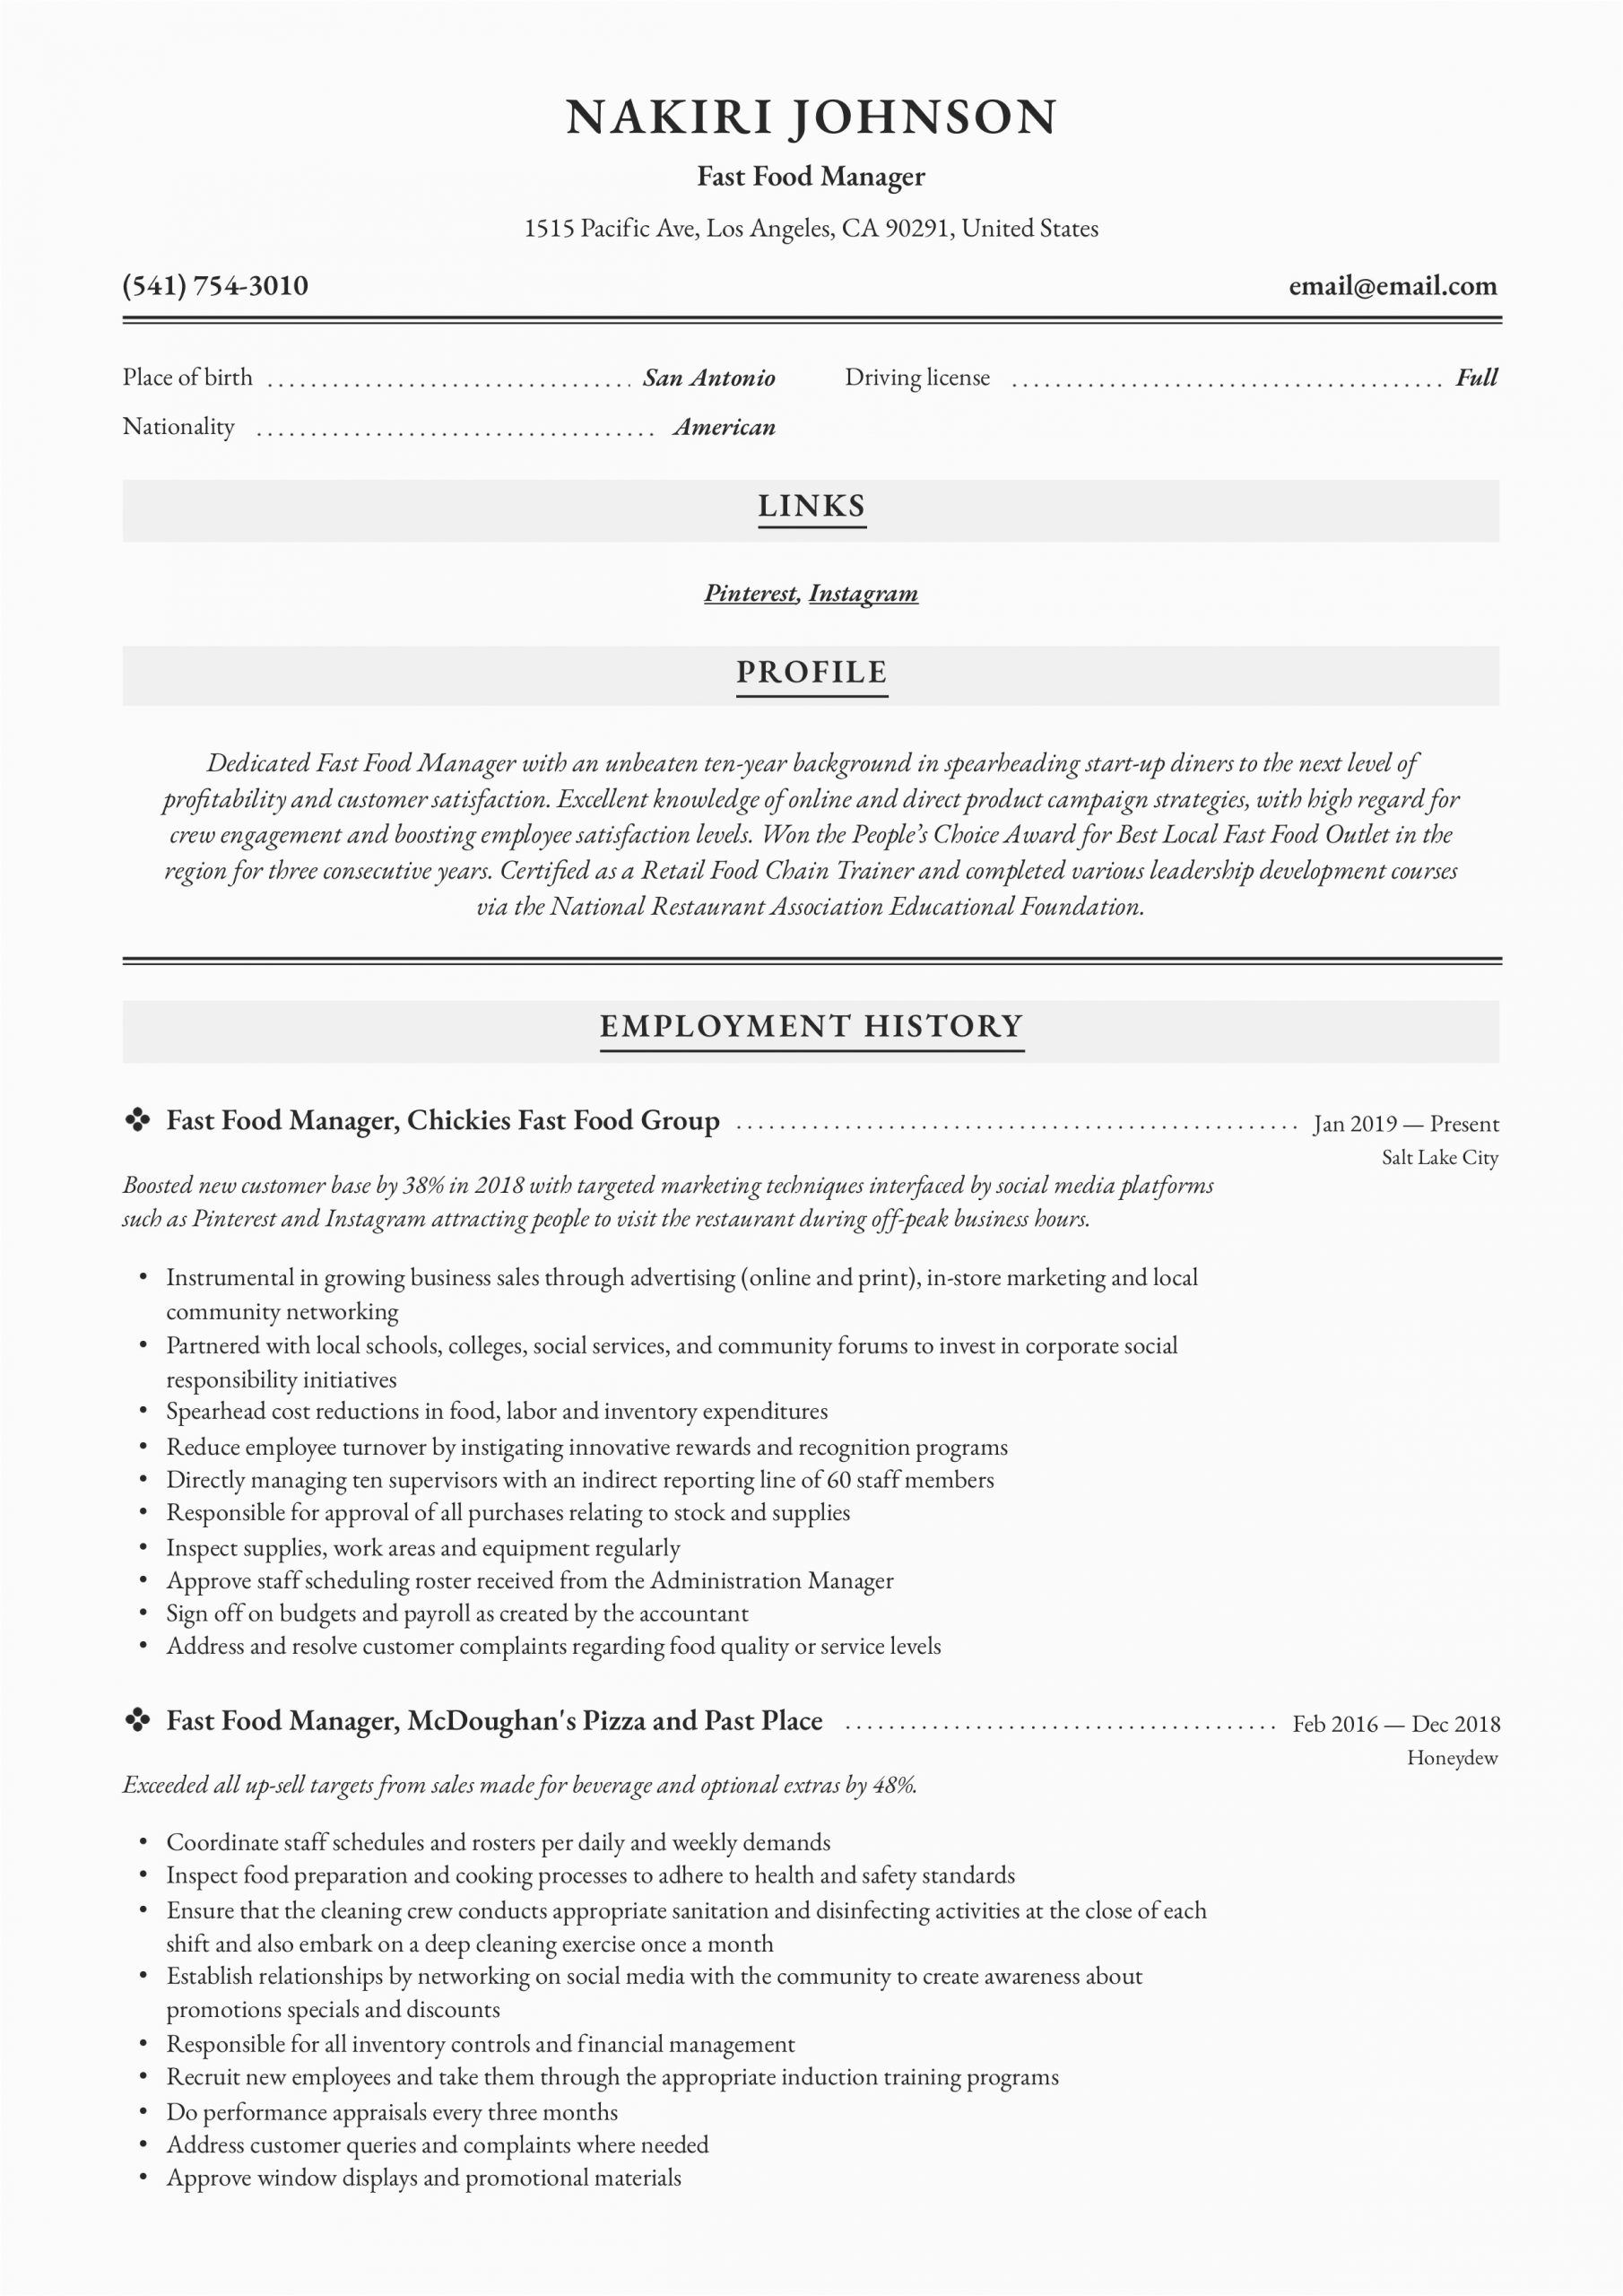 Sample Resumes for Fast Food Jobs Fast Food Manager Resume & Writing Guide 12 Examples